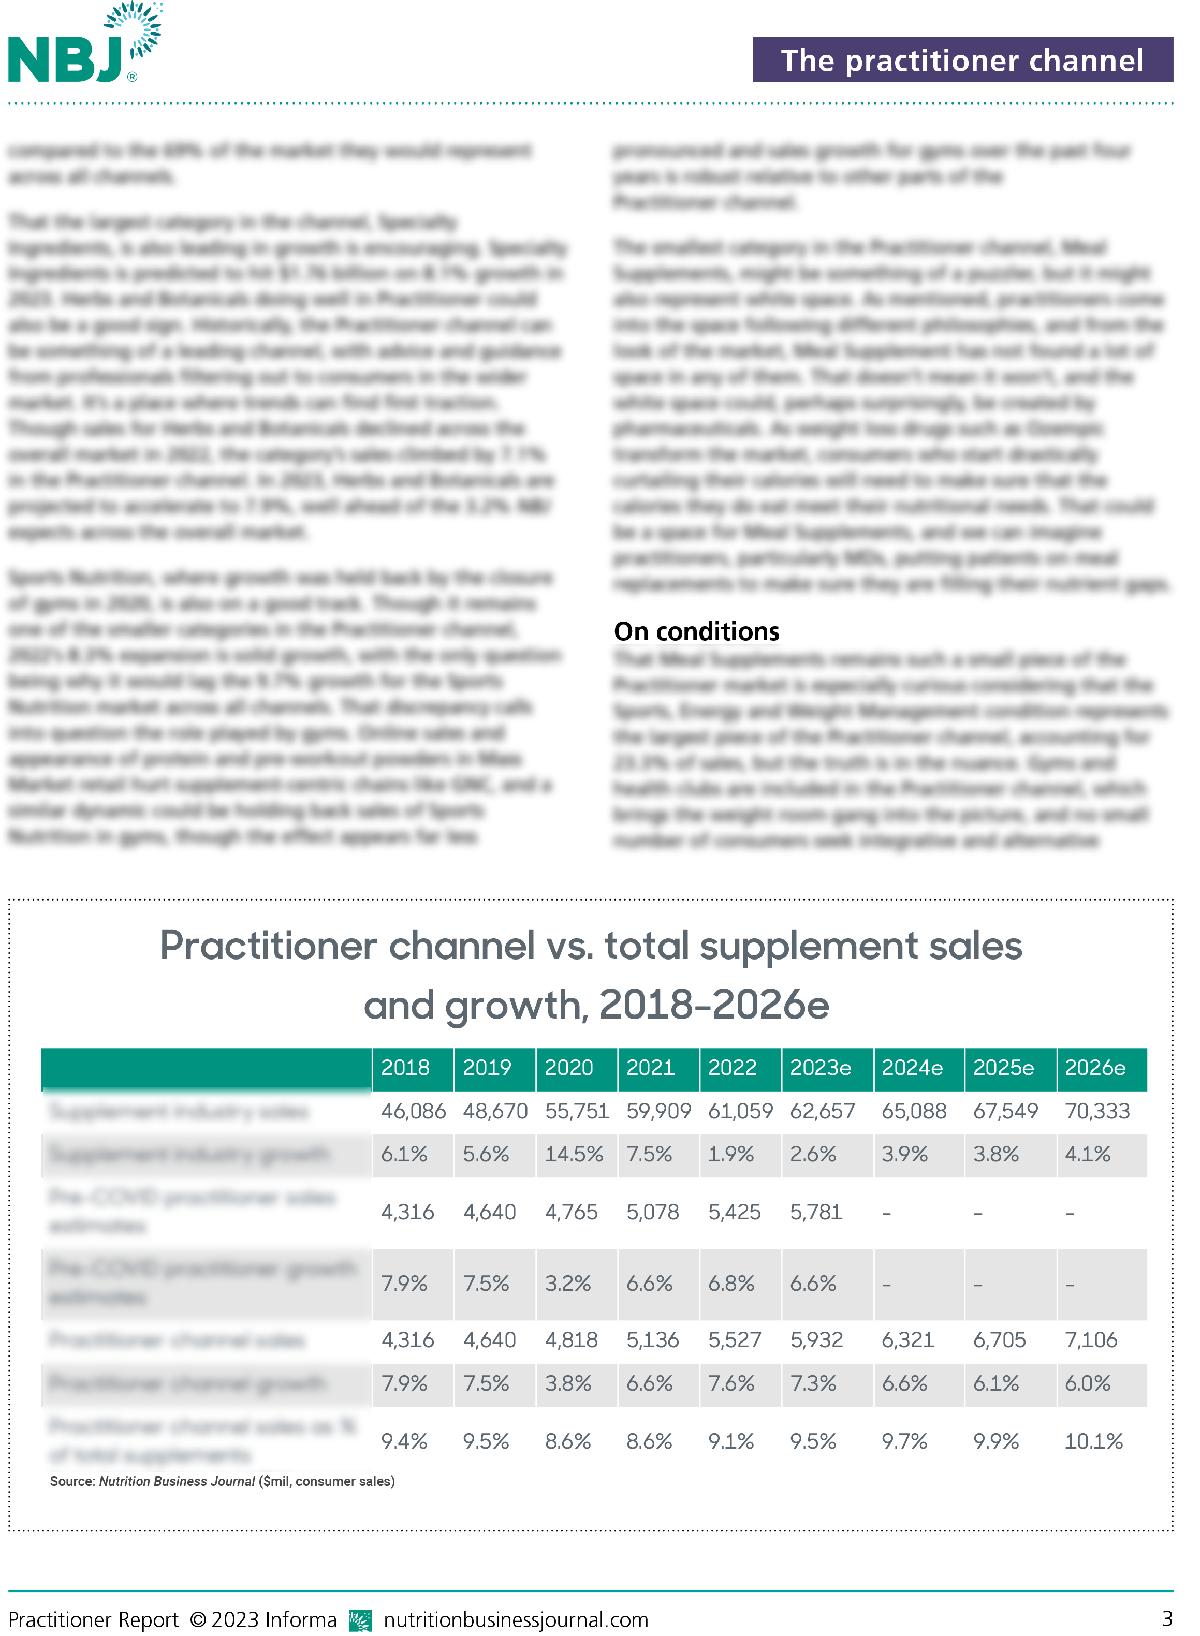 Practitioner Channel vs total supplement sales and growth